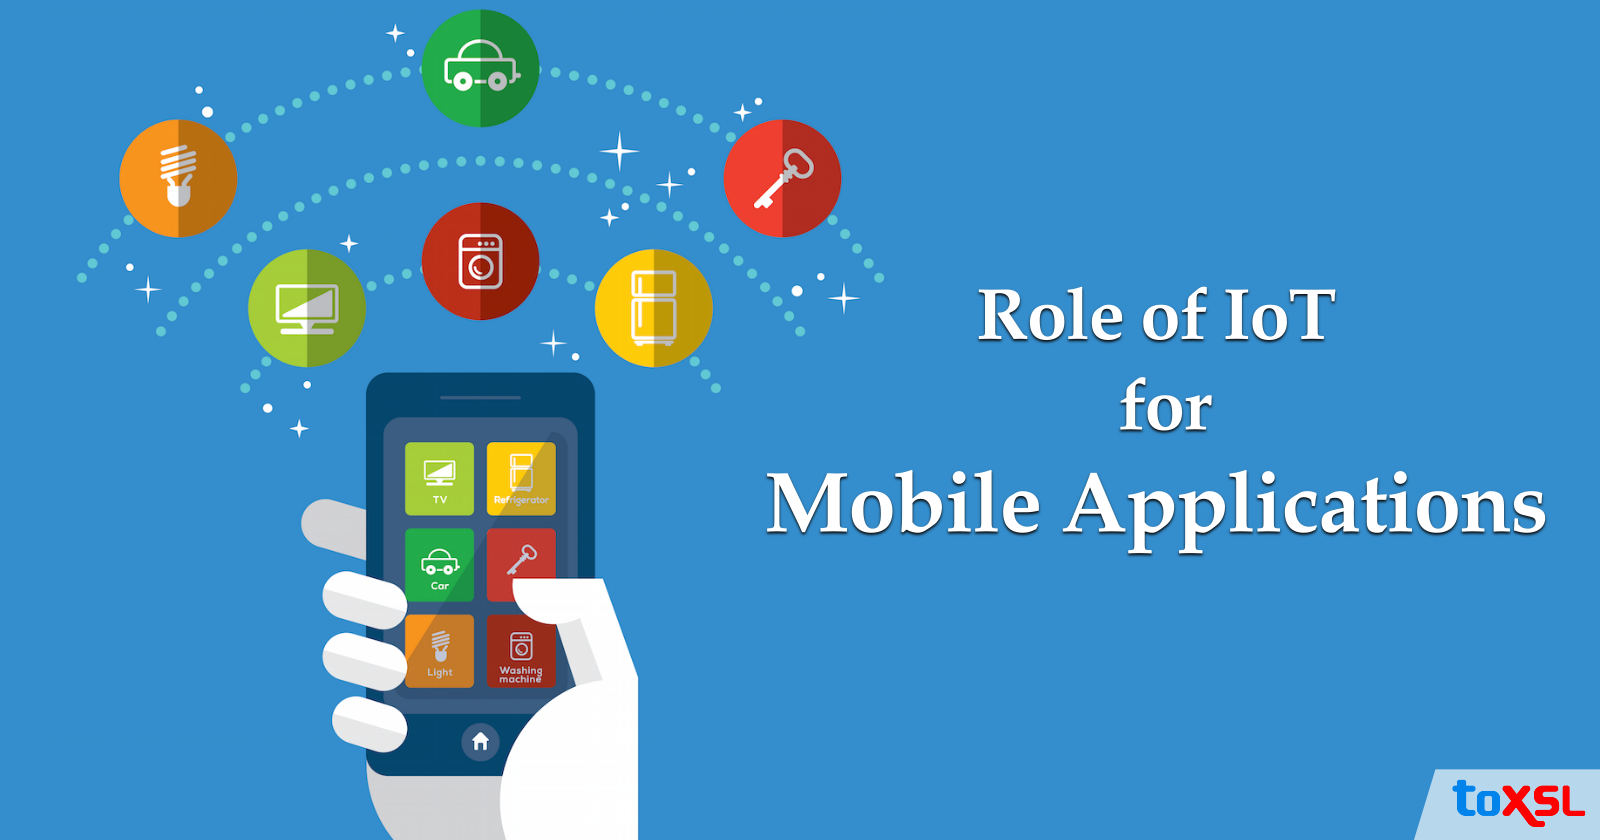 Why is IoT the Future of Mobile Applications?